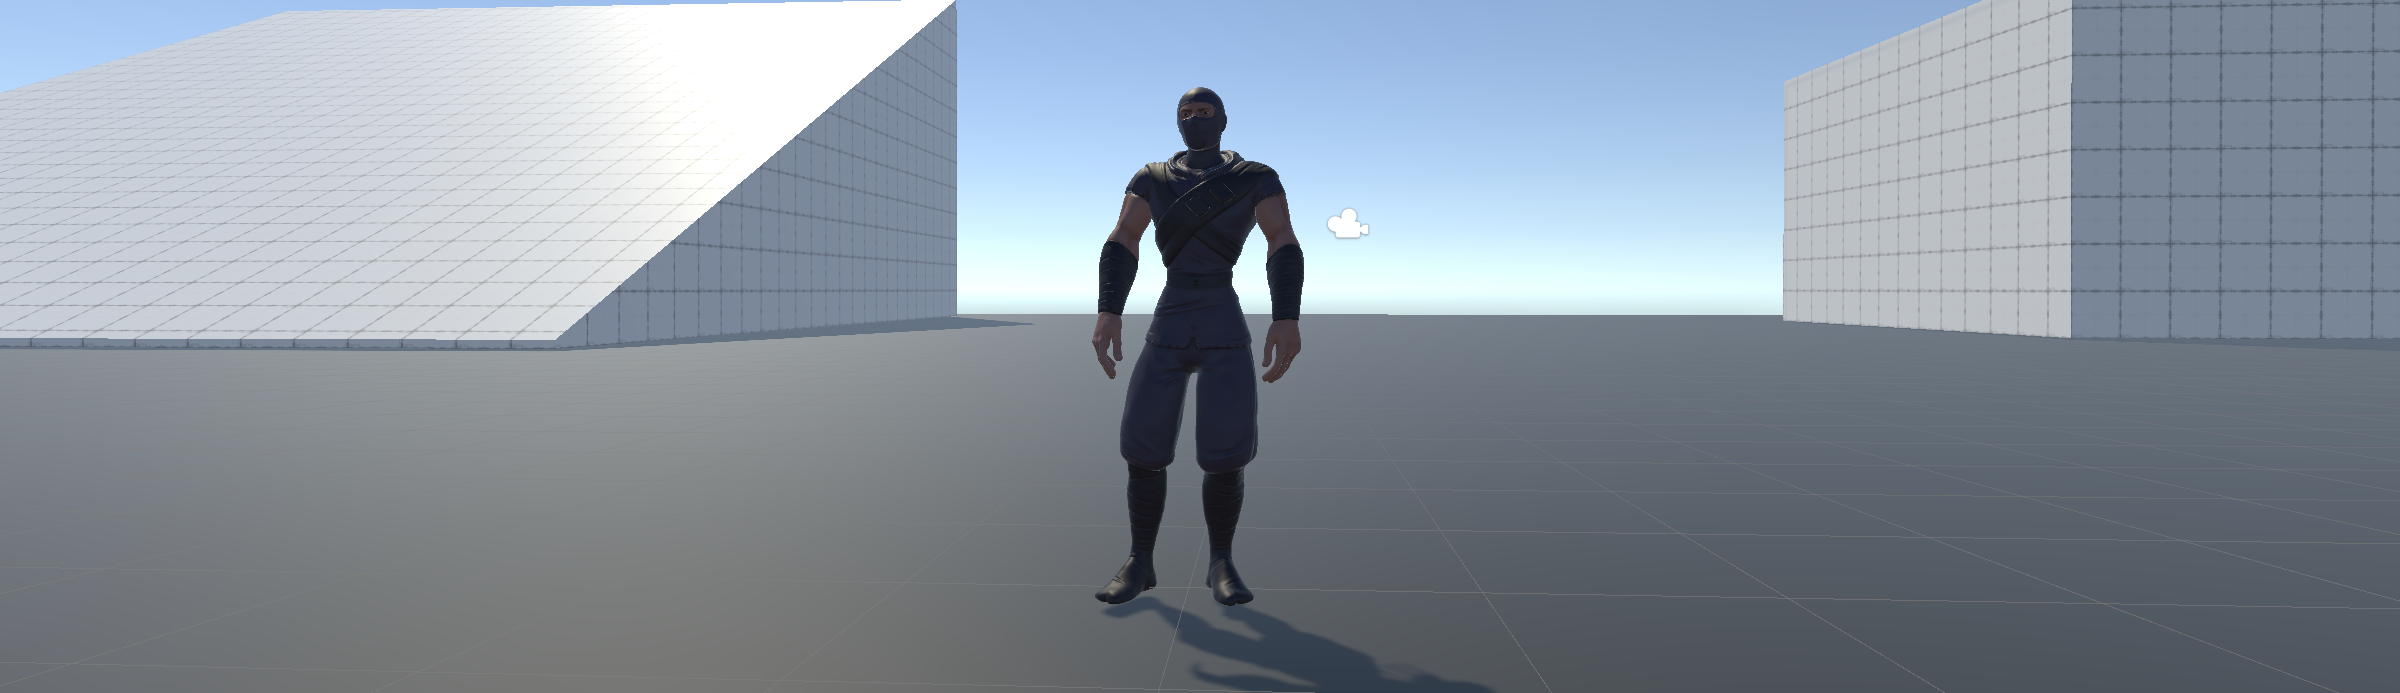 Creating a Unity animated character controller with C# best practices in mind